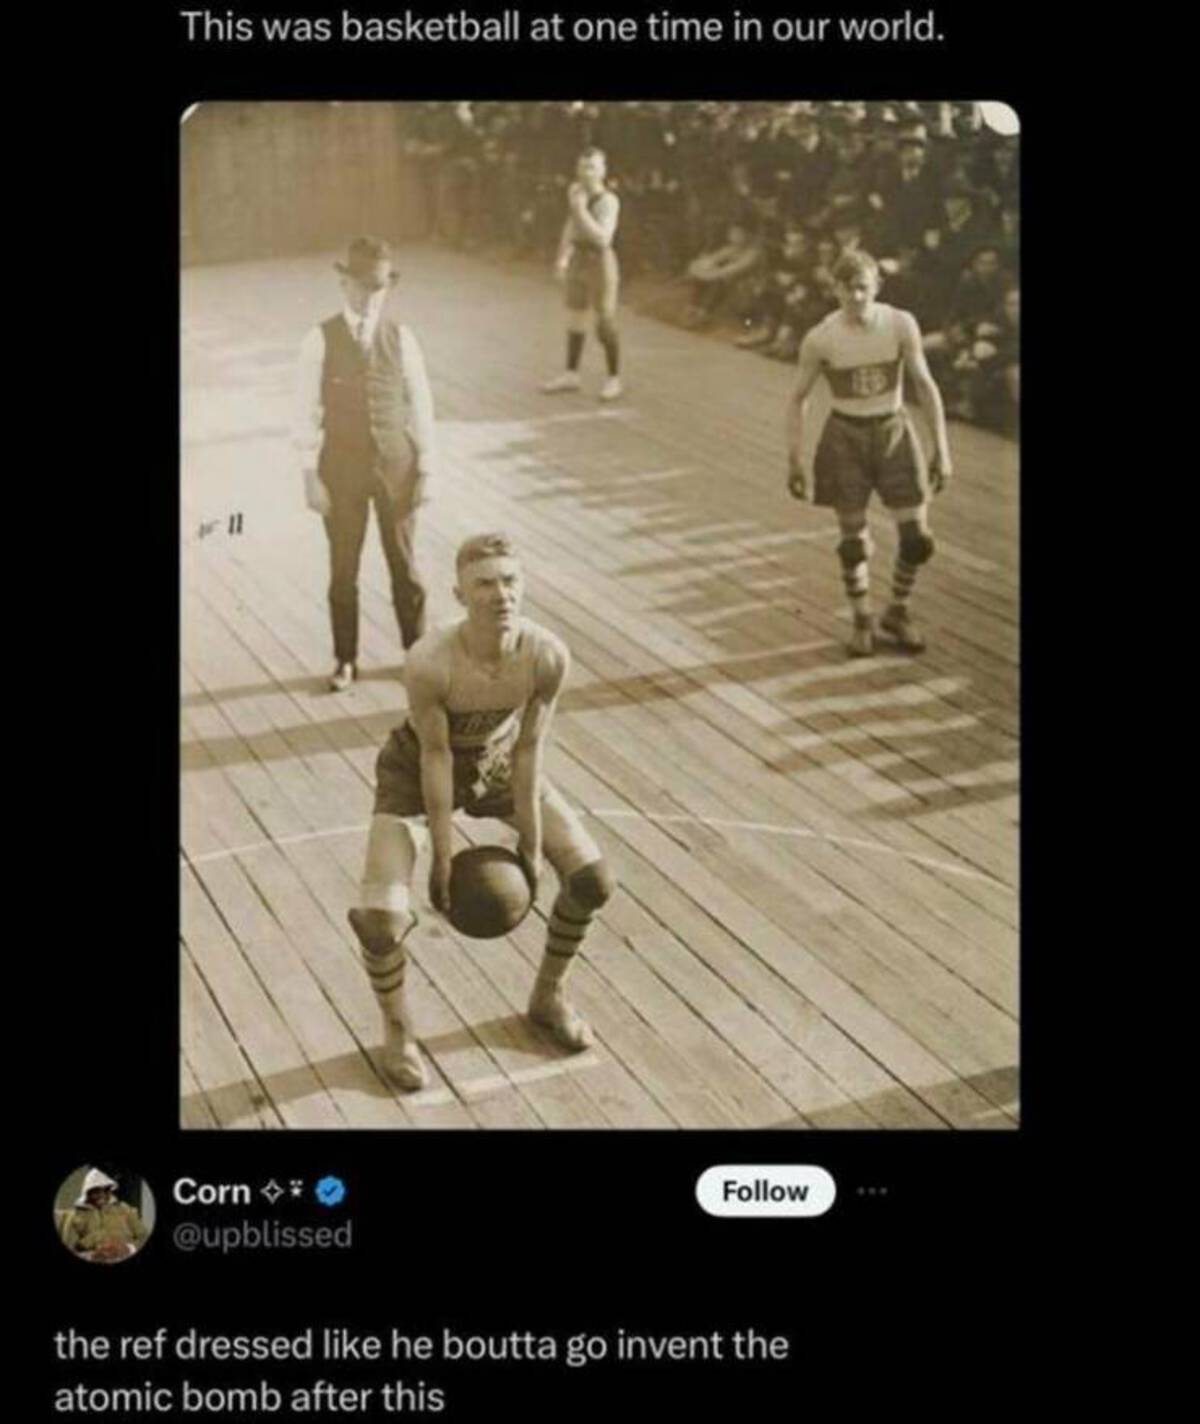 basketball at one time in our world - This was basketball at one time in our world. 11 Corn the ref dressed he boutta go invent the atomic bomb after this